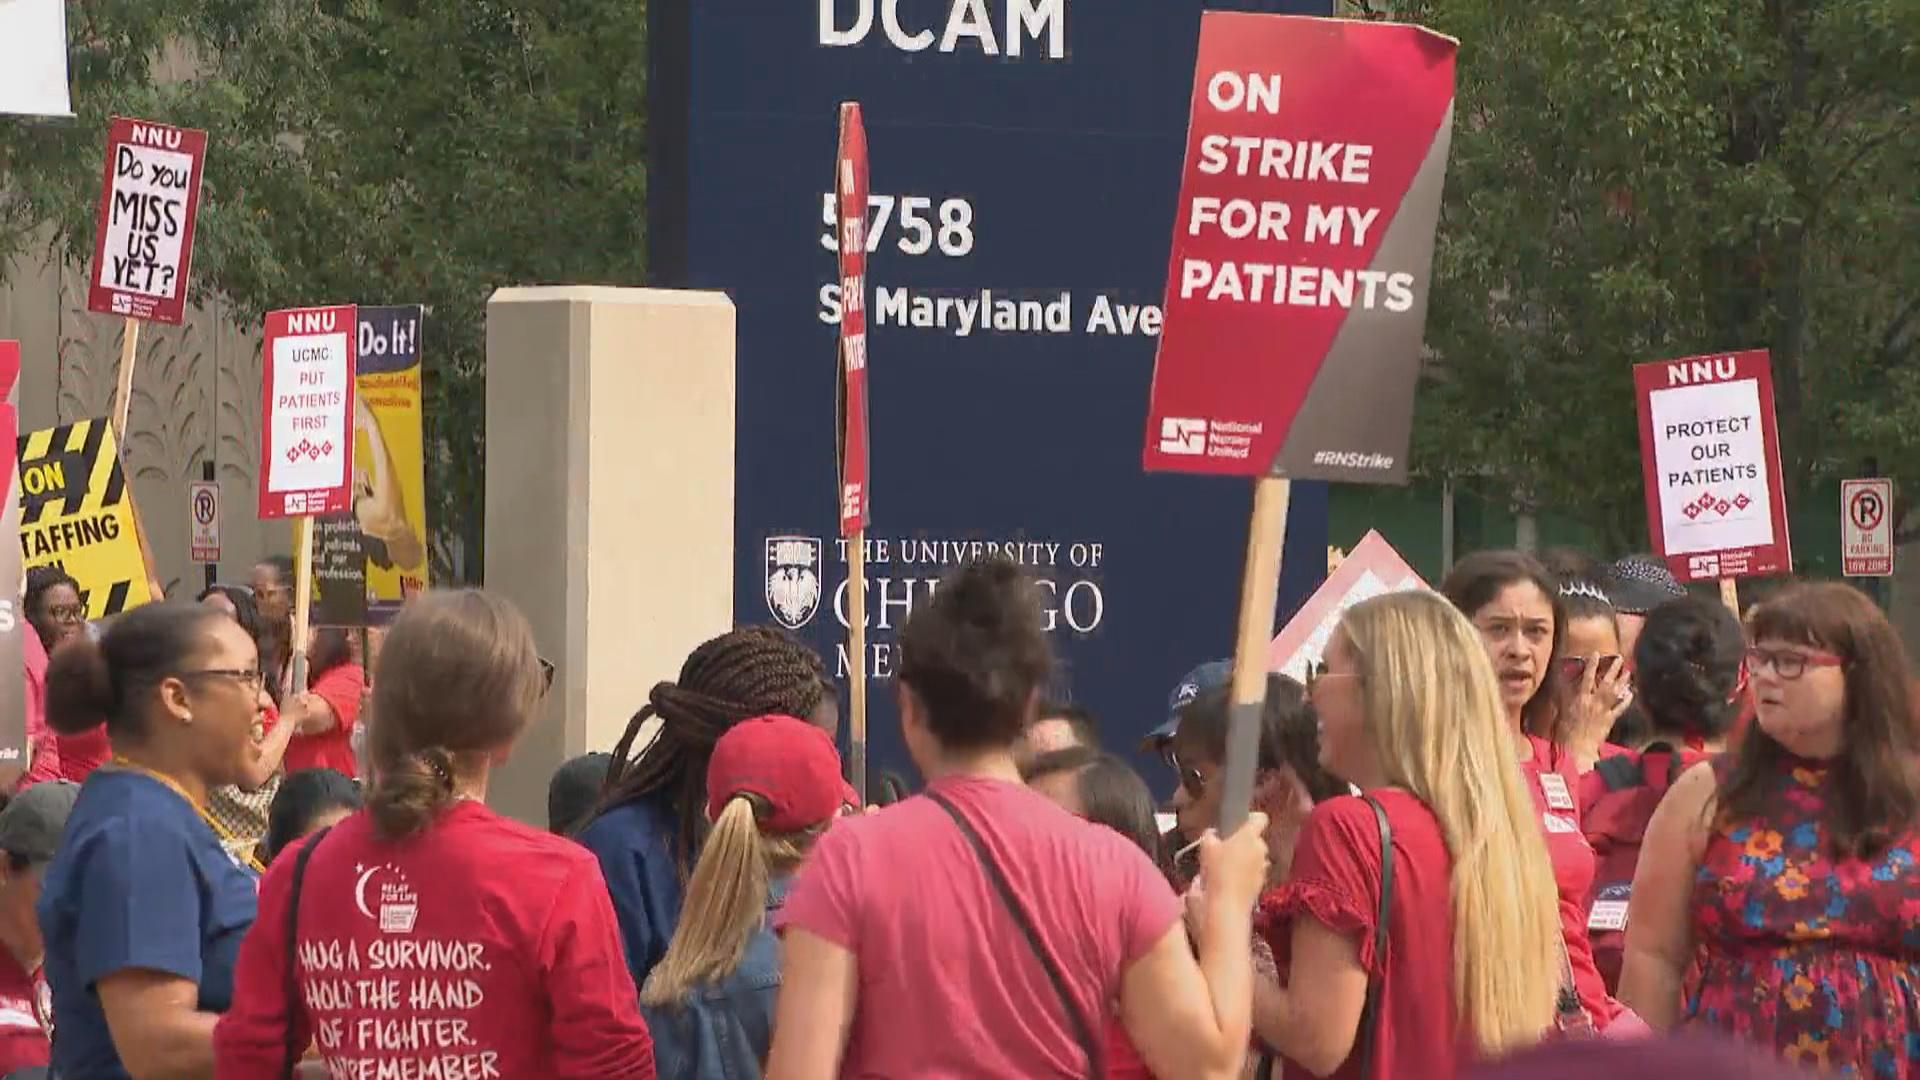 Hundreds of people hit the picket line at 7 a.m. Friday to protest what nurses describe as staffing shortages and forced overtime that are risking the safety of patients at the 618-bed hospital. (WTTW News)